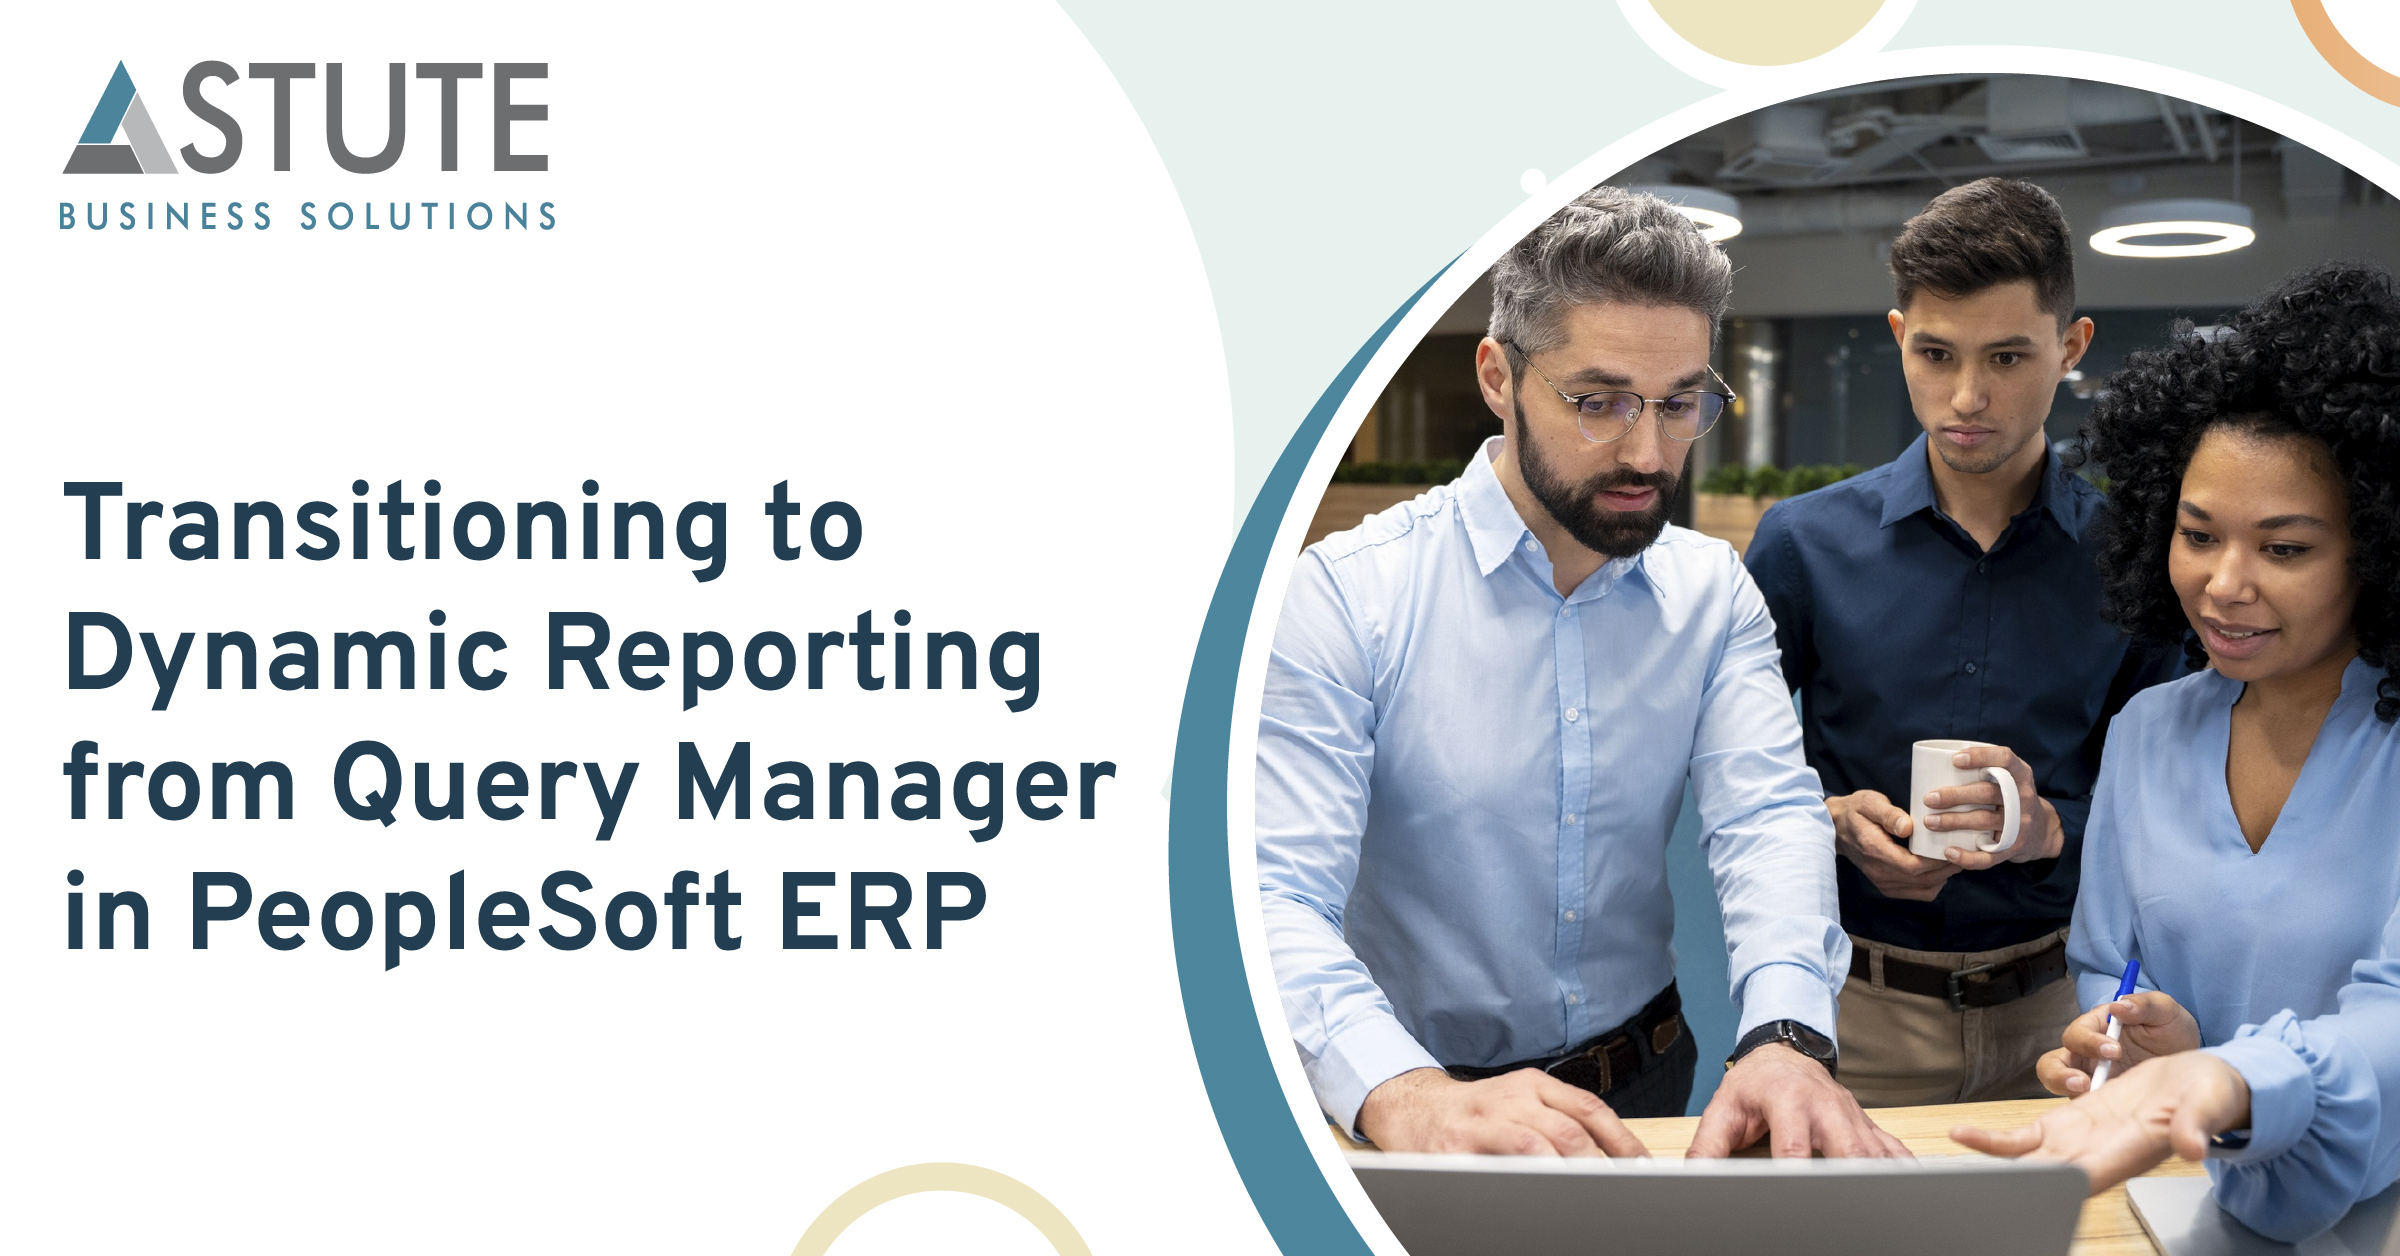 Transitioning to Dynamic Reporting from Query Manager in PeopleSoft ERP